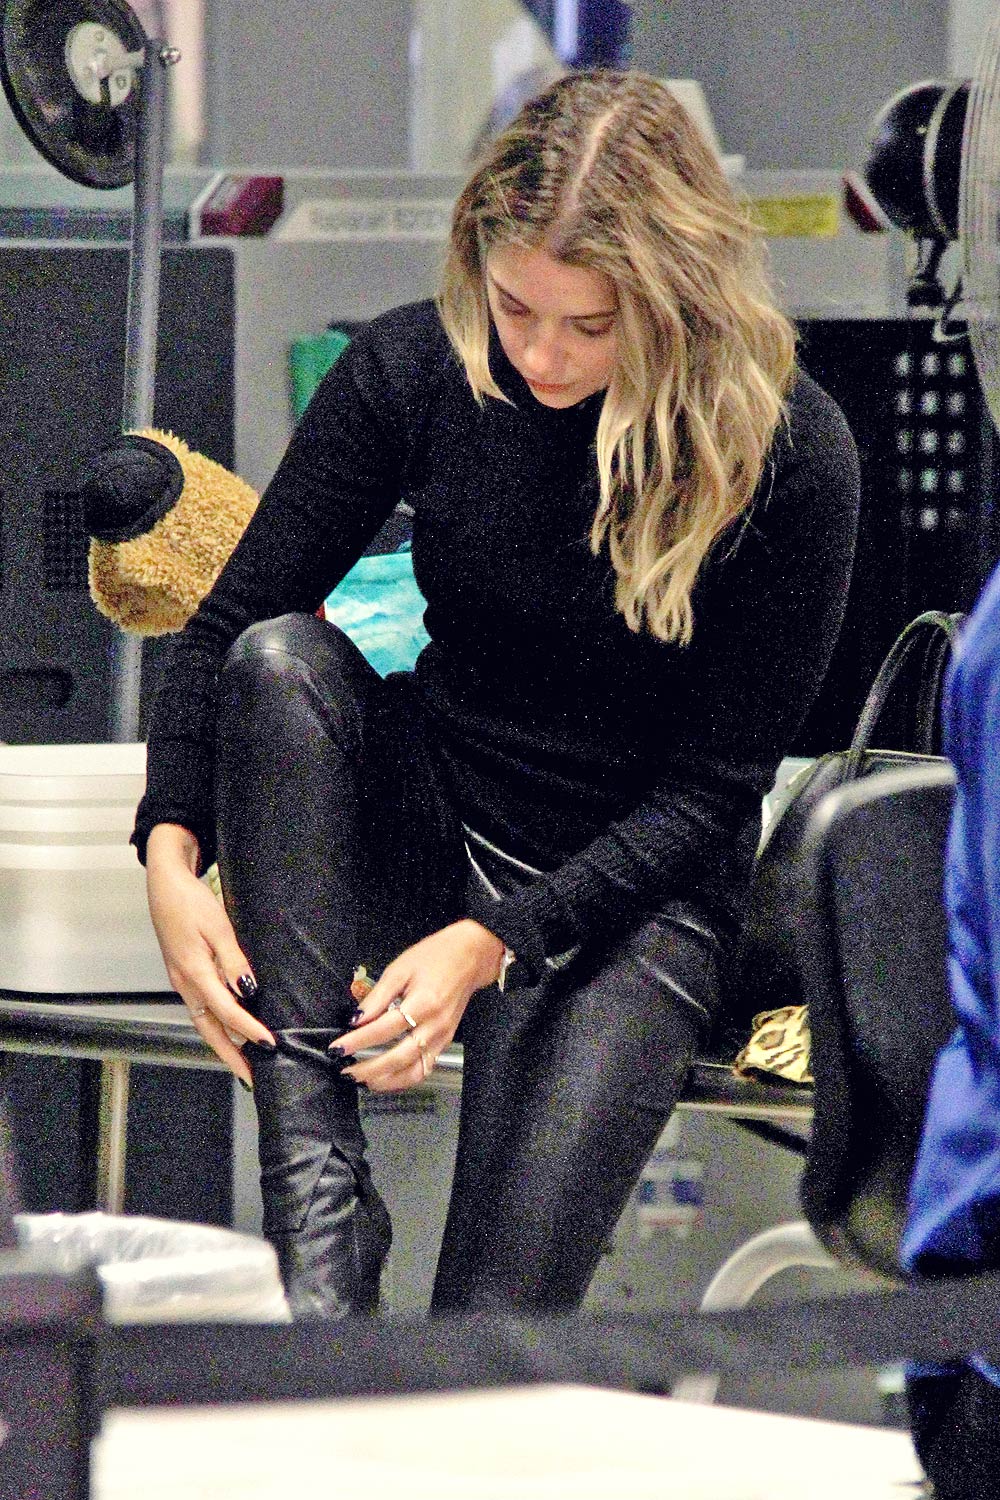 Ashley Benson at LAX airport - Leather Celebrities